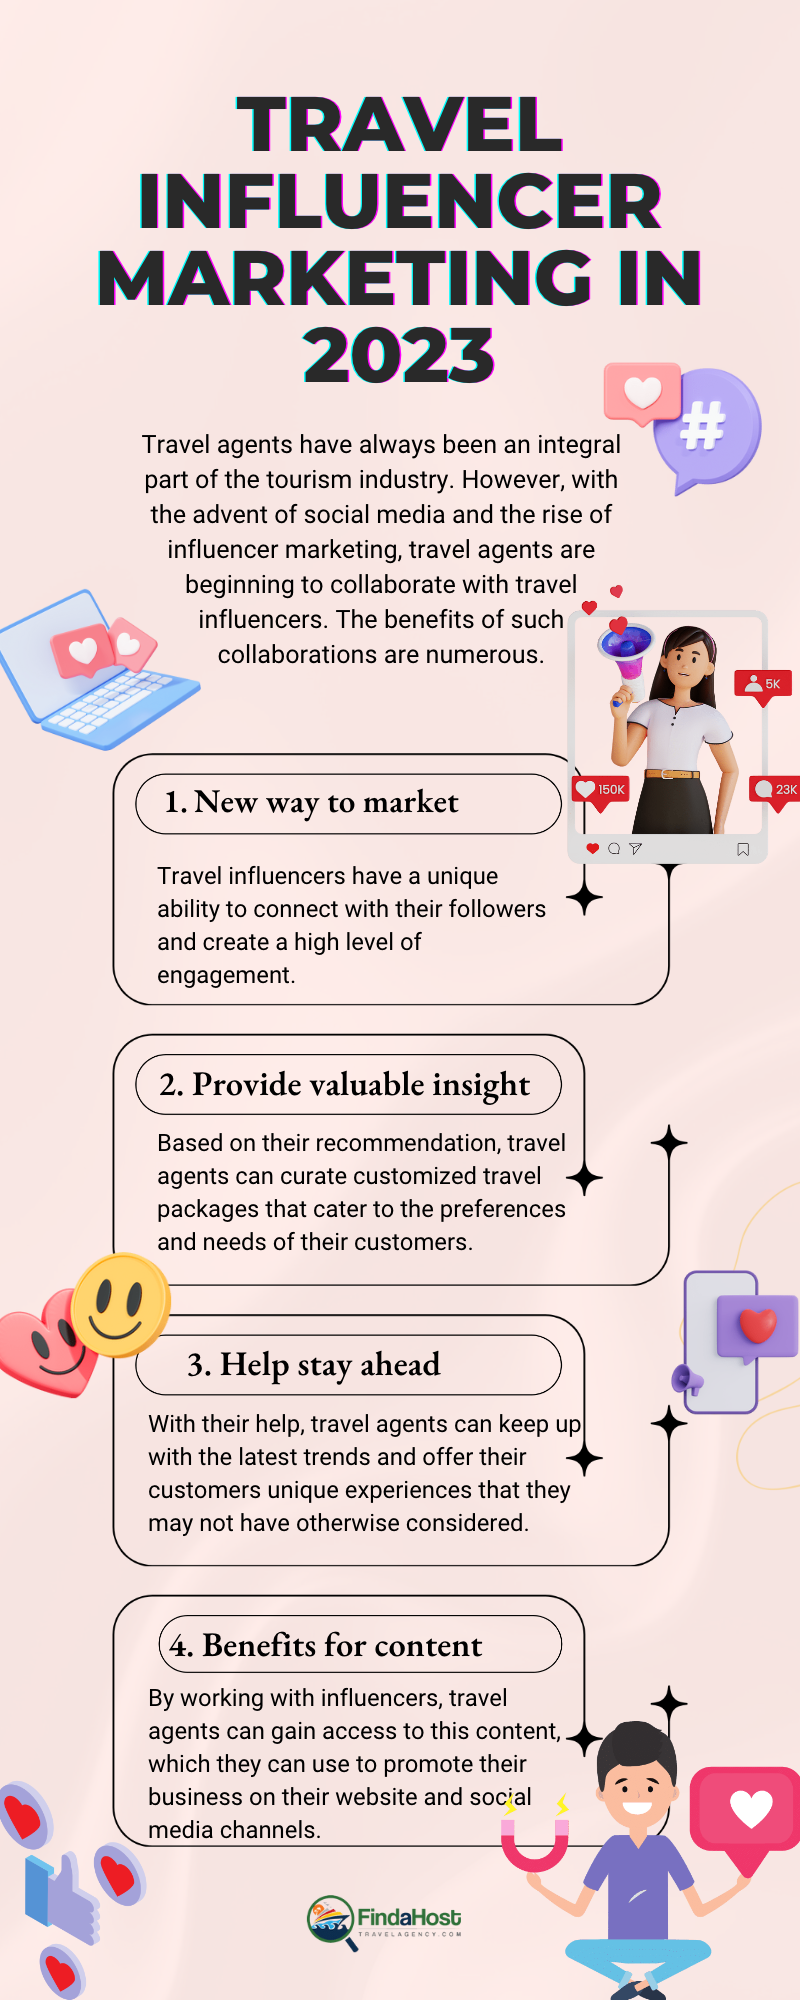 Travel-Influencer-Marketing-in-2023-Infographic-FAHTA-